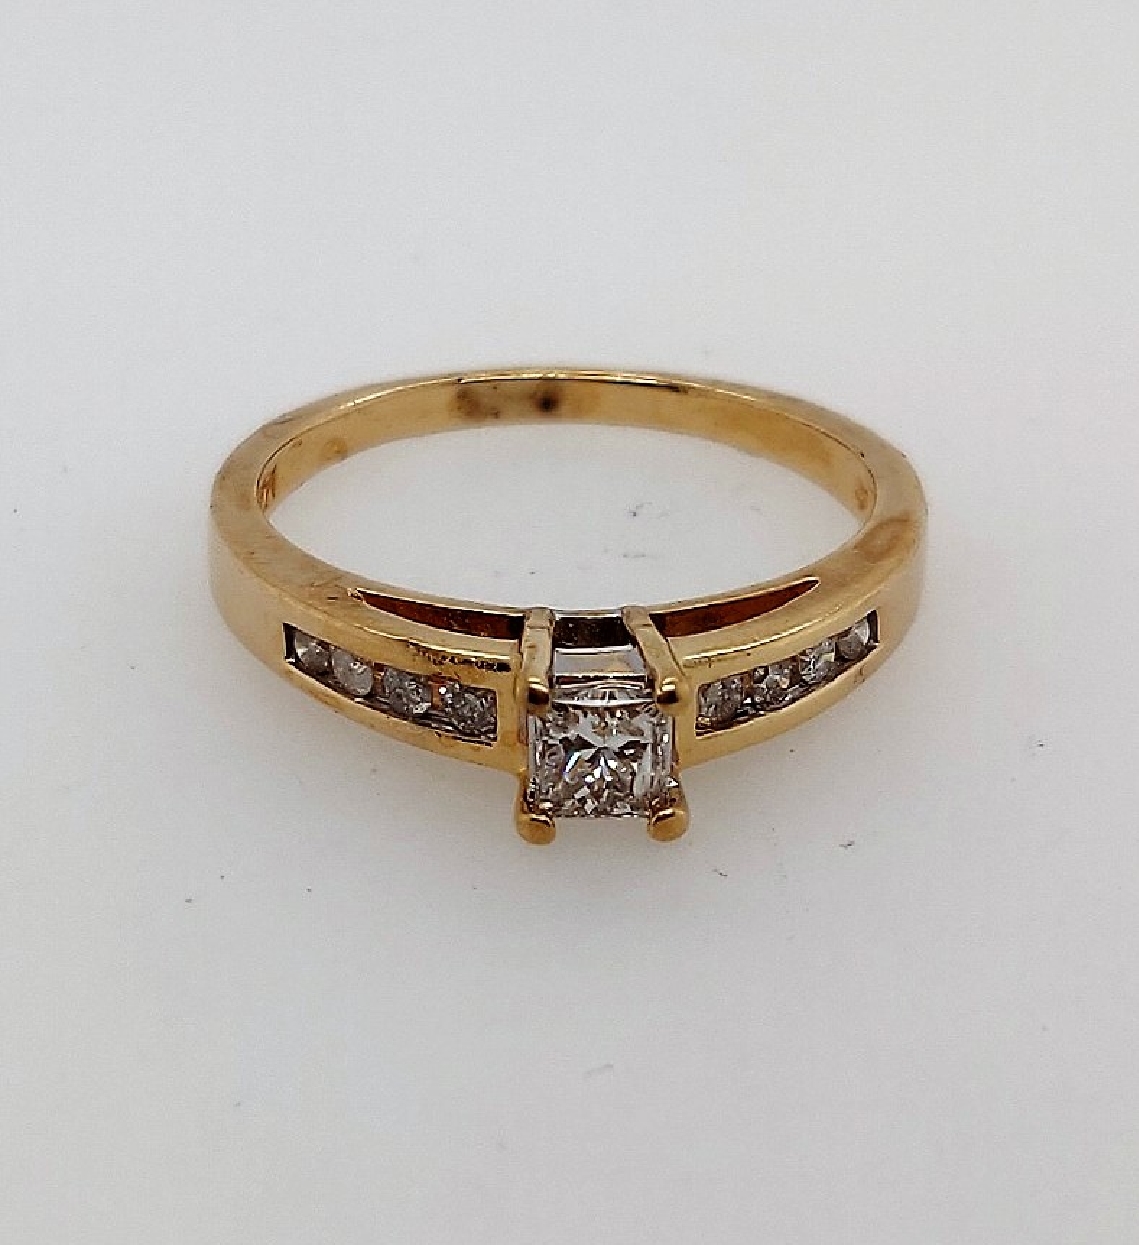 14kt yellow gold diamond engagement ring with prong set 0.28 princess cut dia center I1/J and eight channel set round diamonds approx 0.14 ctw sides I2/J. Size 8.5.